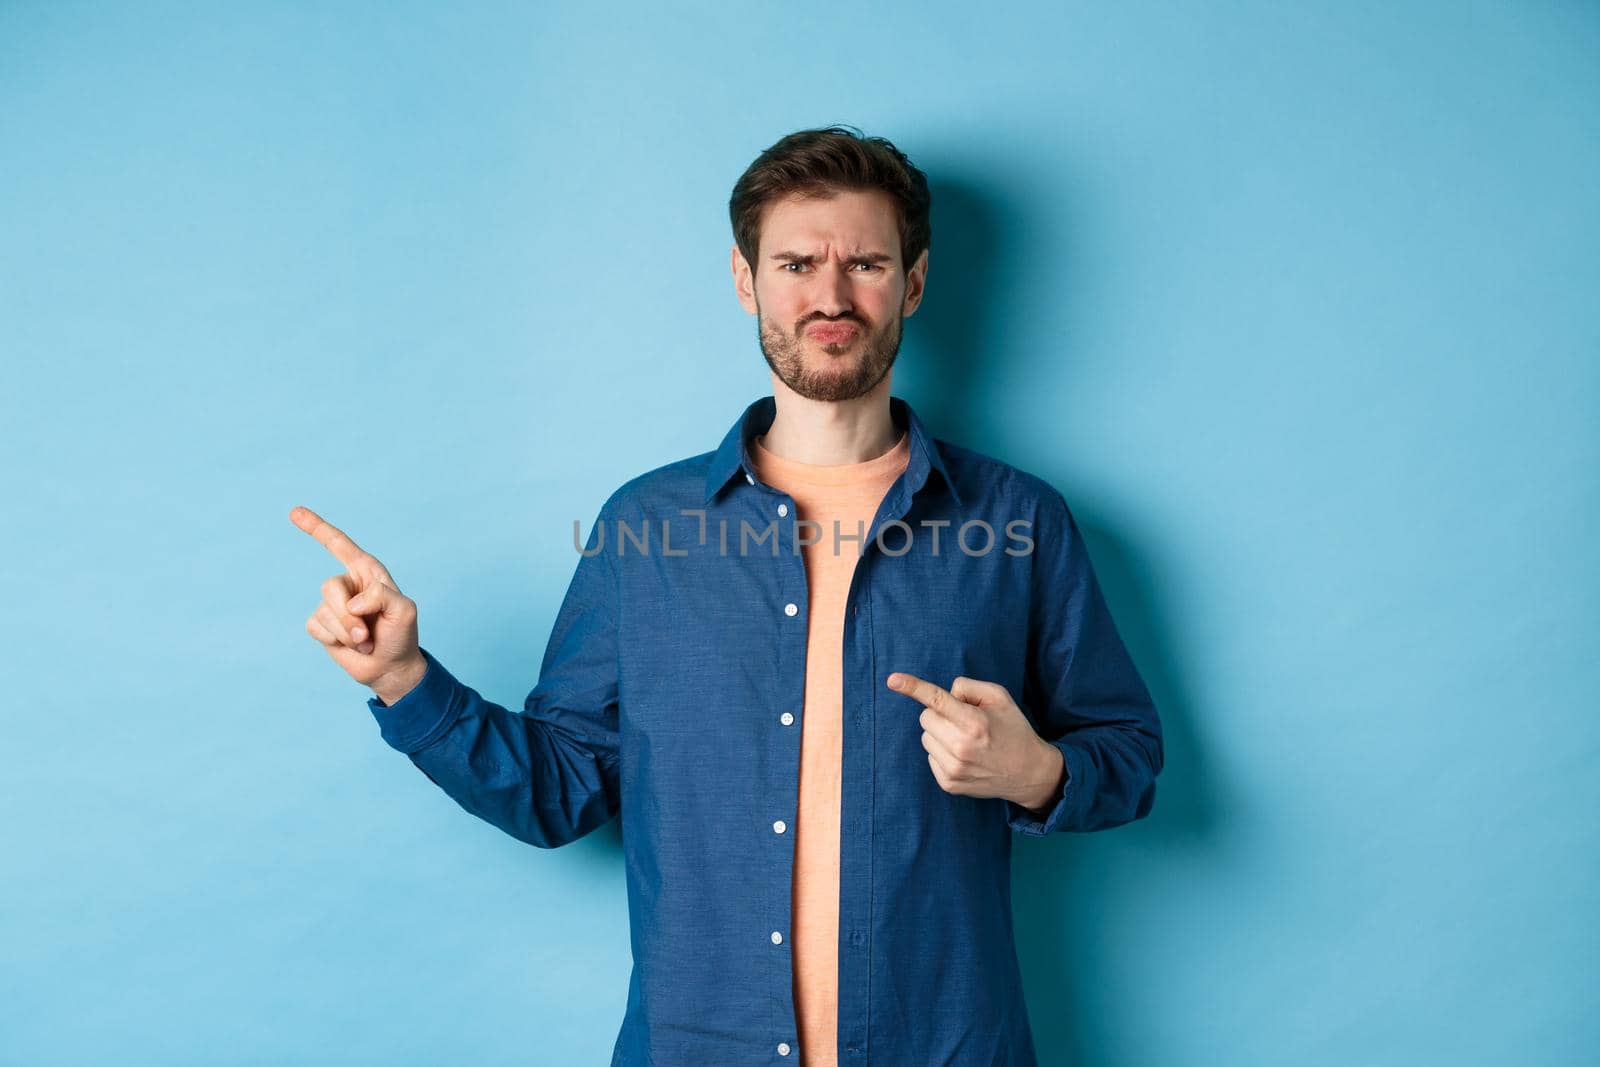 Disappointed and skeptical guy frowning, pucker lips and pointing fingers left at empty space, complaining at bad thing, standing upset on blue background.